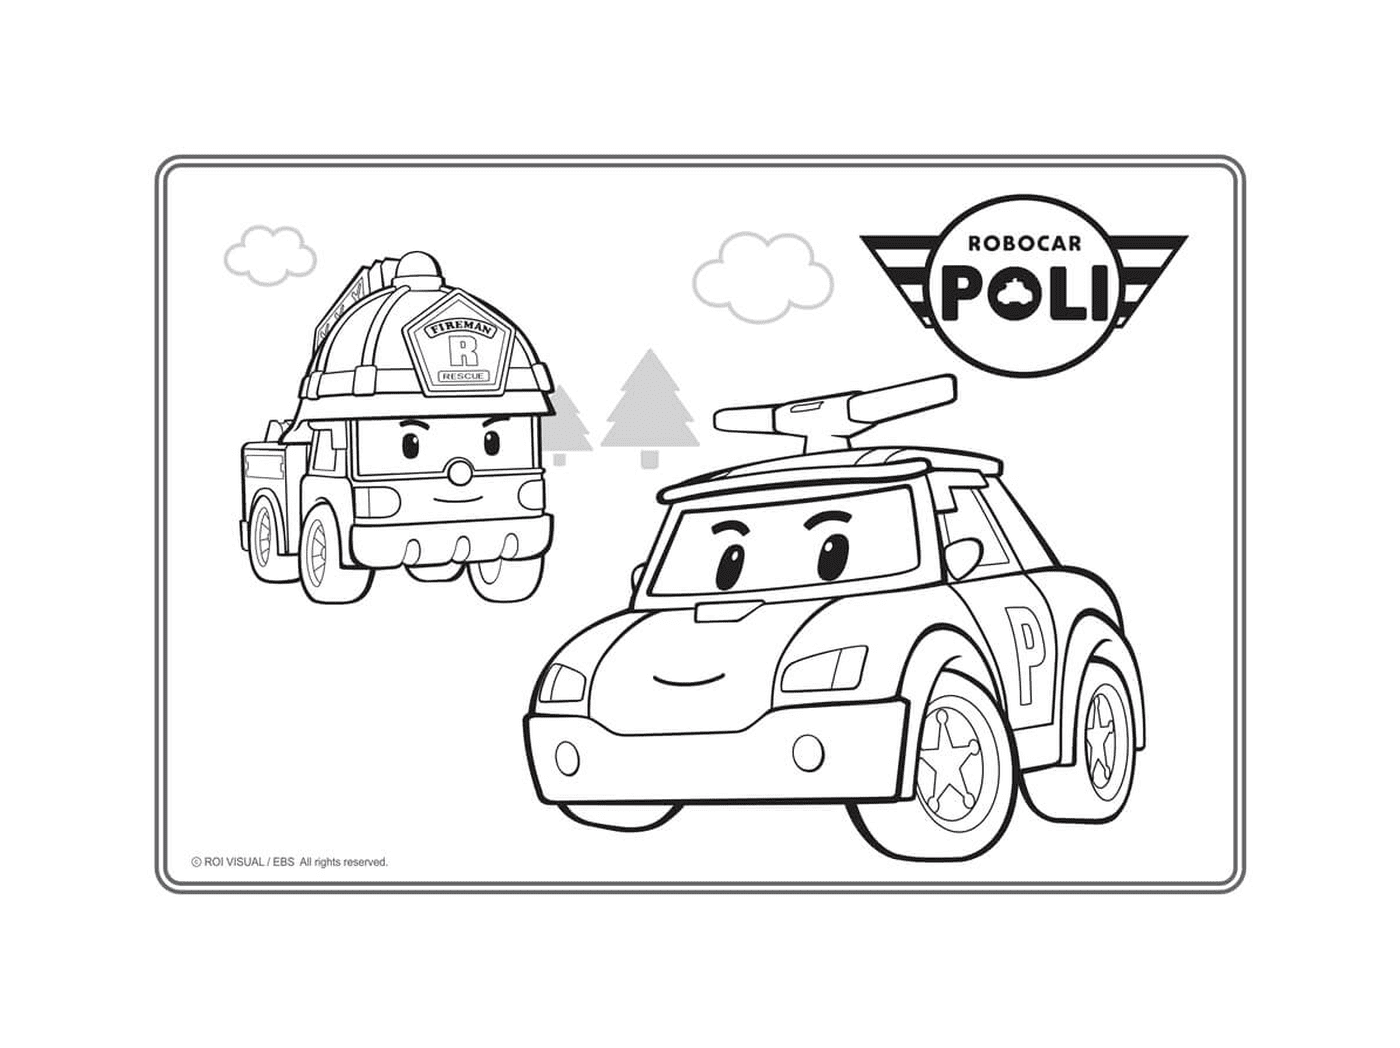  Roy and Poli, safety vehicles 